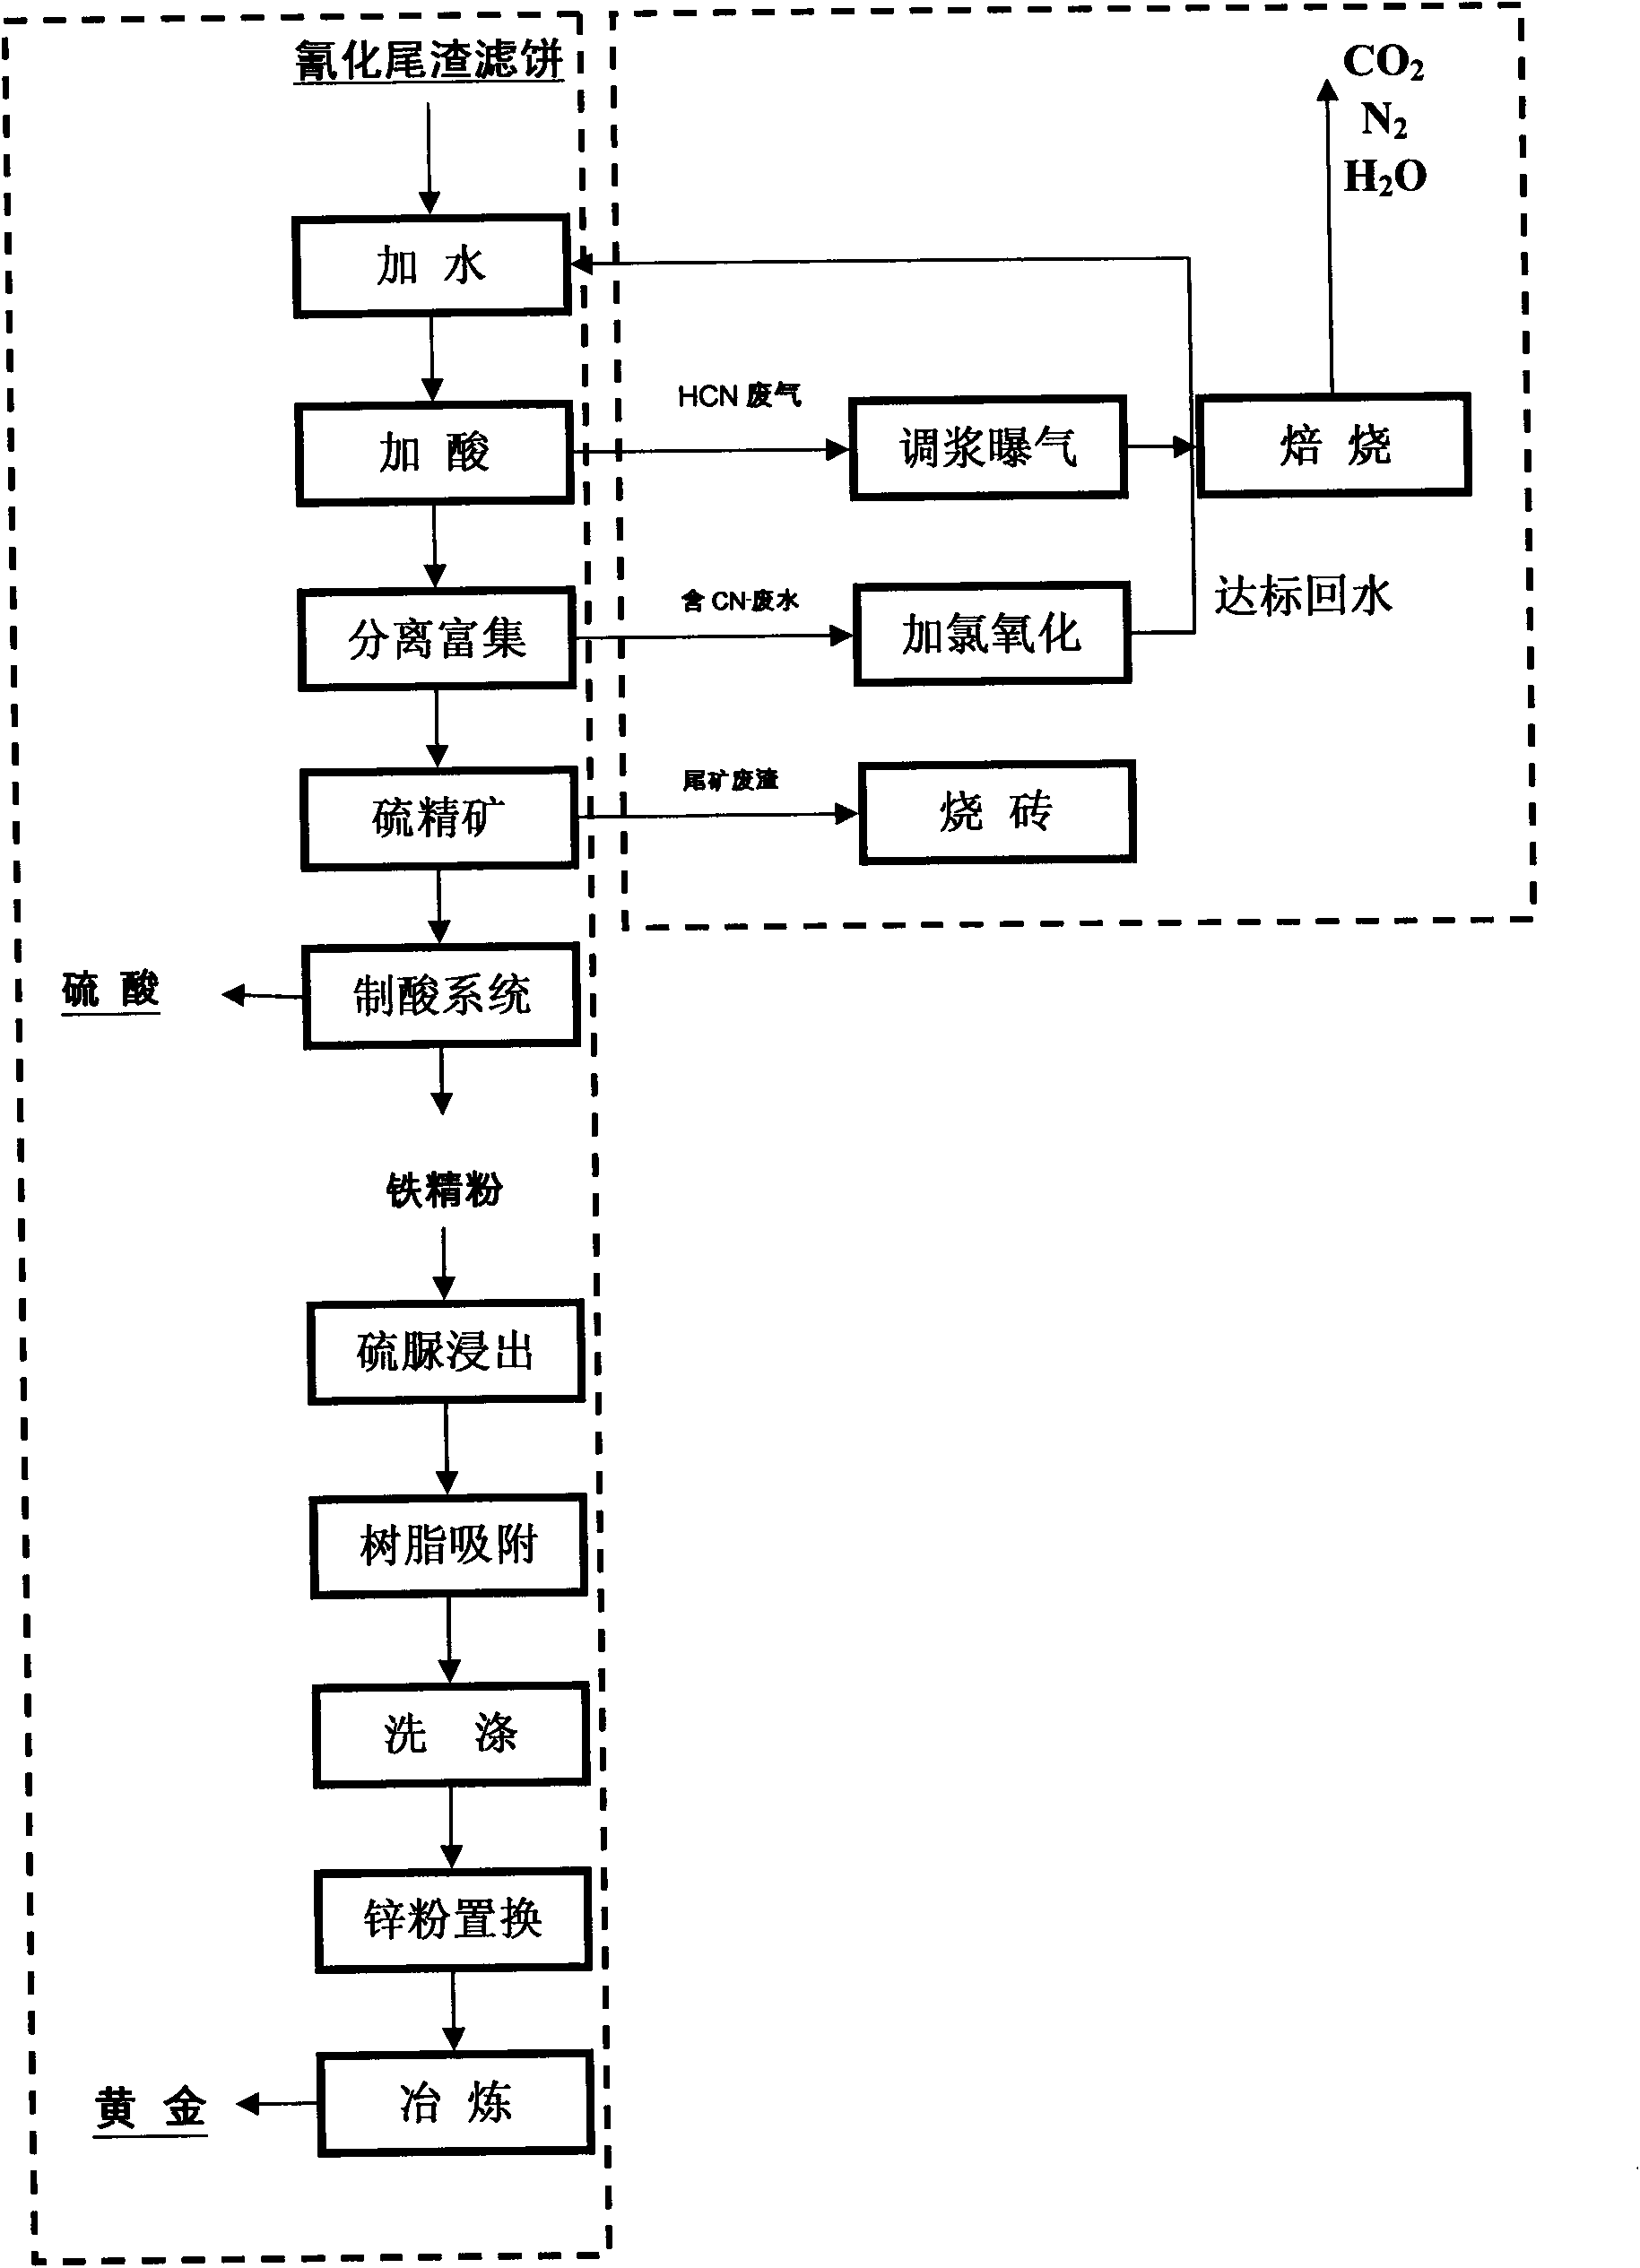 Method for high-value and non-waste utilization of cyanidation slag